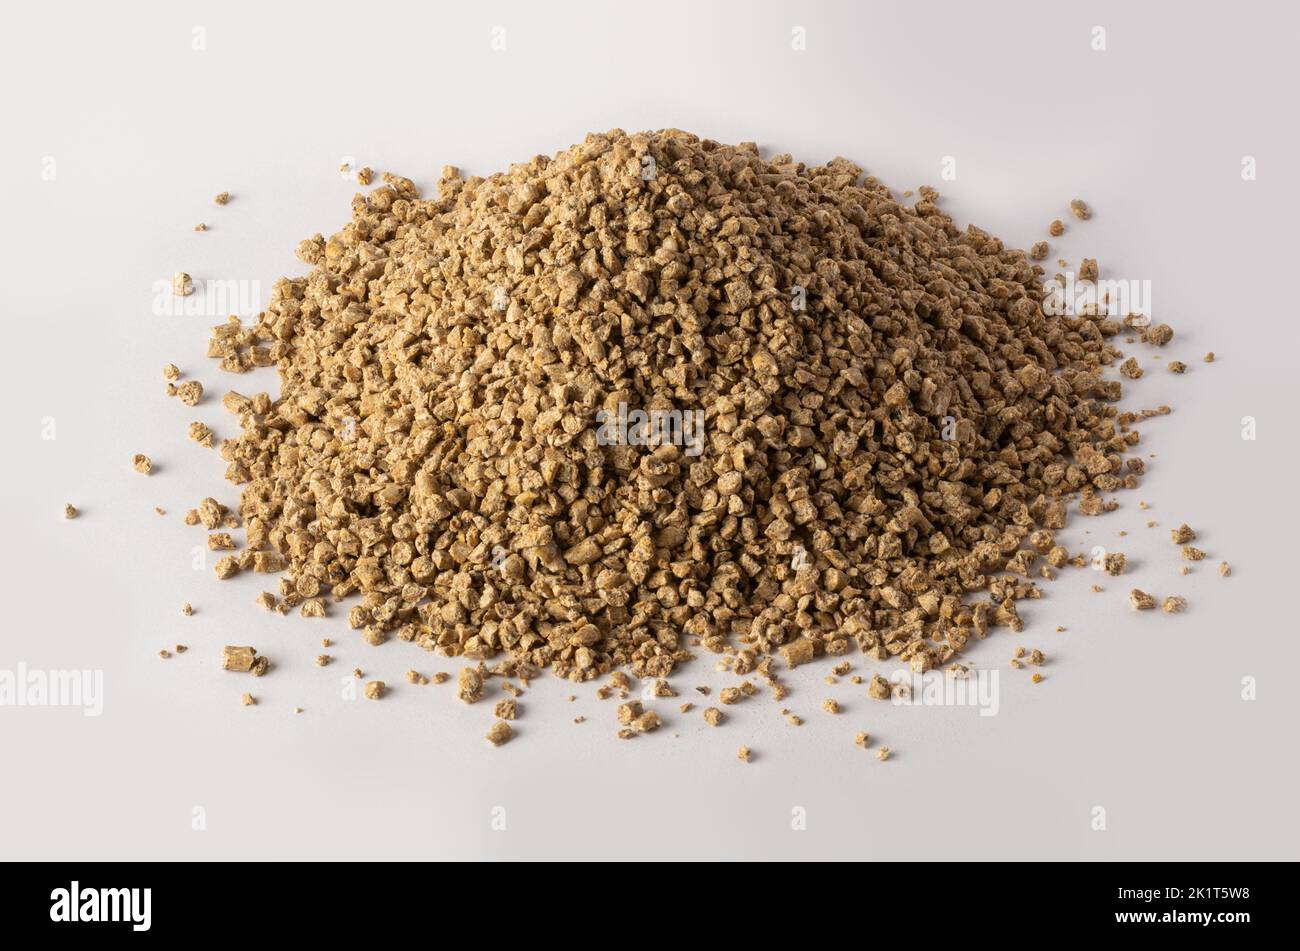 pile of chicken feed crumble, semi-loose variety made from pellets cracked into smaller pieces, isolated on white background Stock Photo